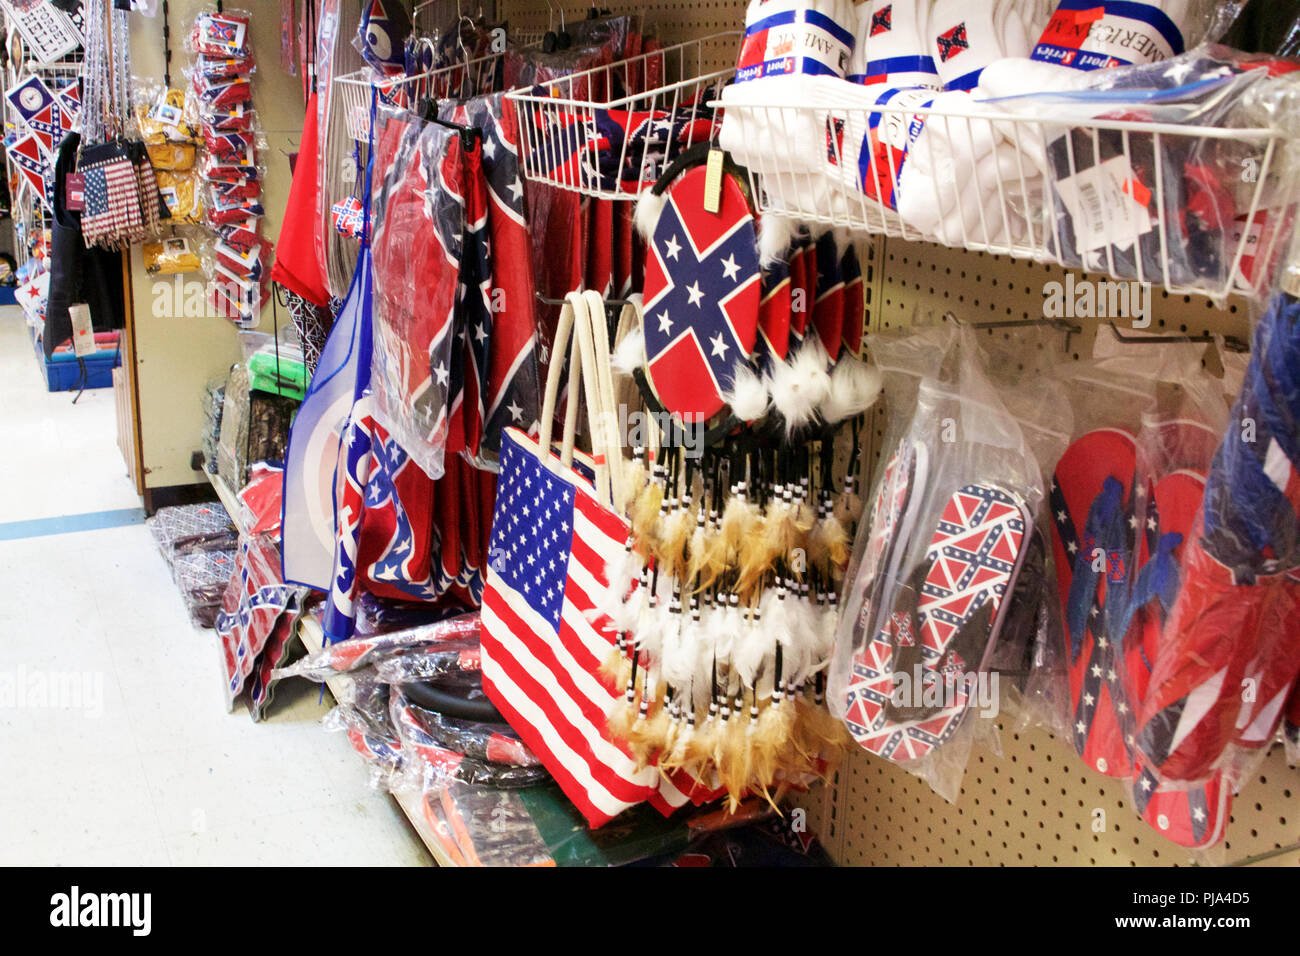 New Church, Virginia, USA - September 1, 2018: Confederate flags surpass American flags in size and number at Dixieland, a gas station and gift shop. Stock Photo